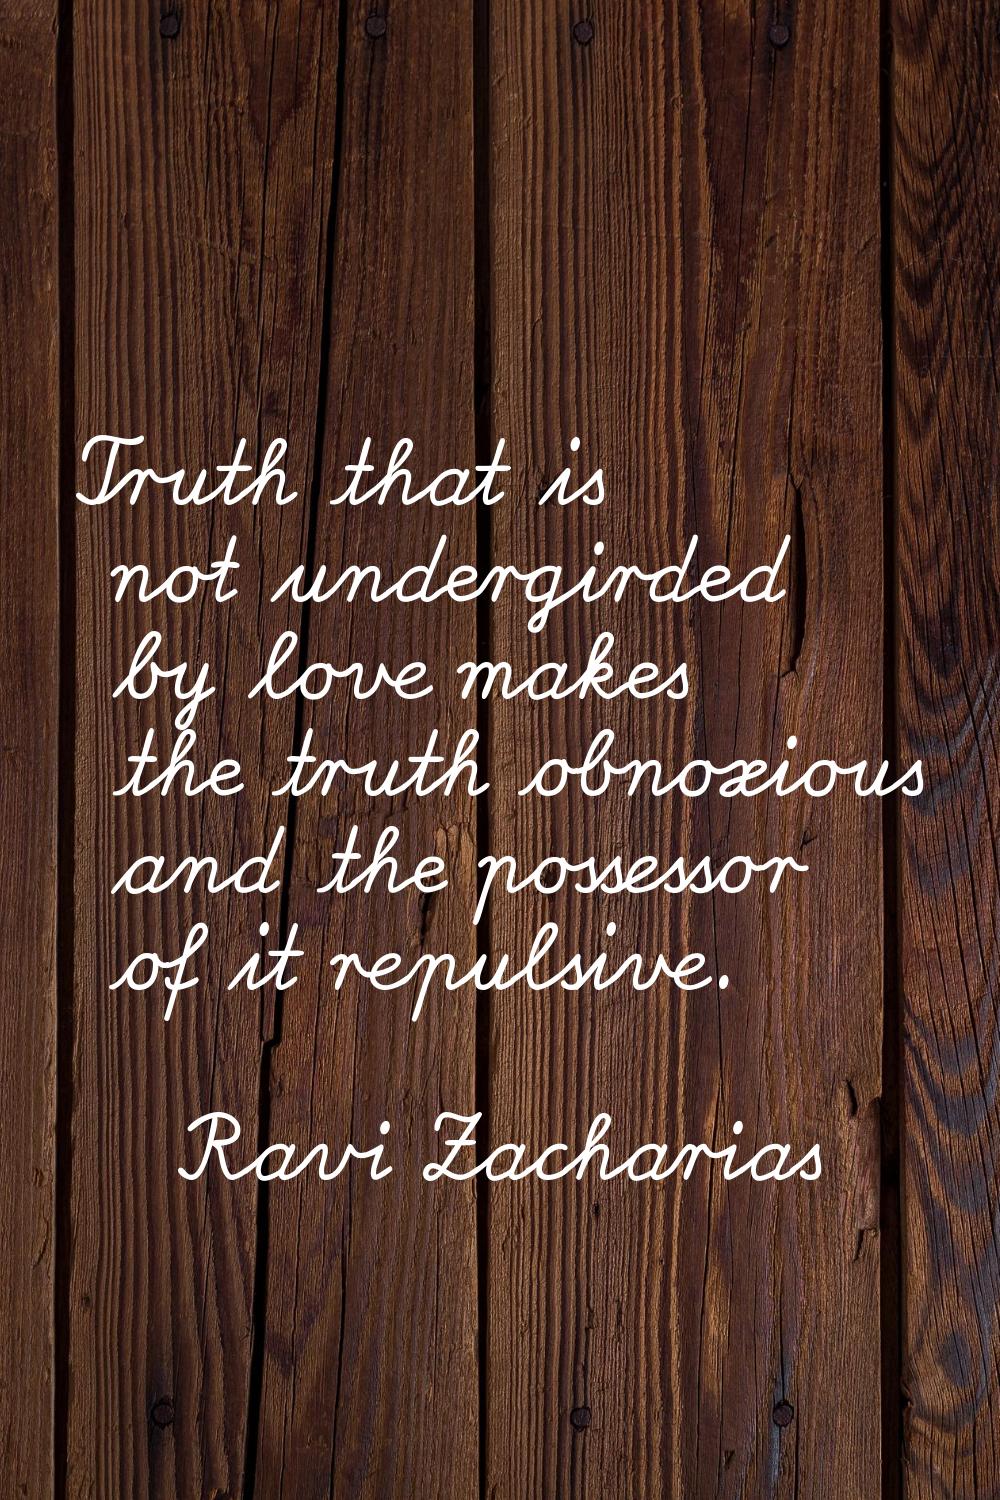 Truth that is not undergirded by love makes the truth obnoxious and the possessor of it repulsive.